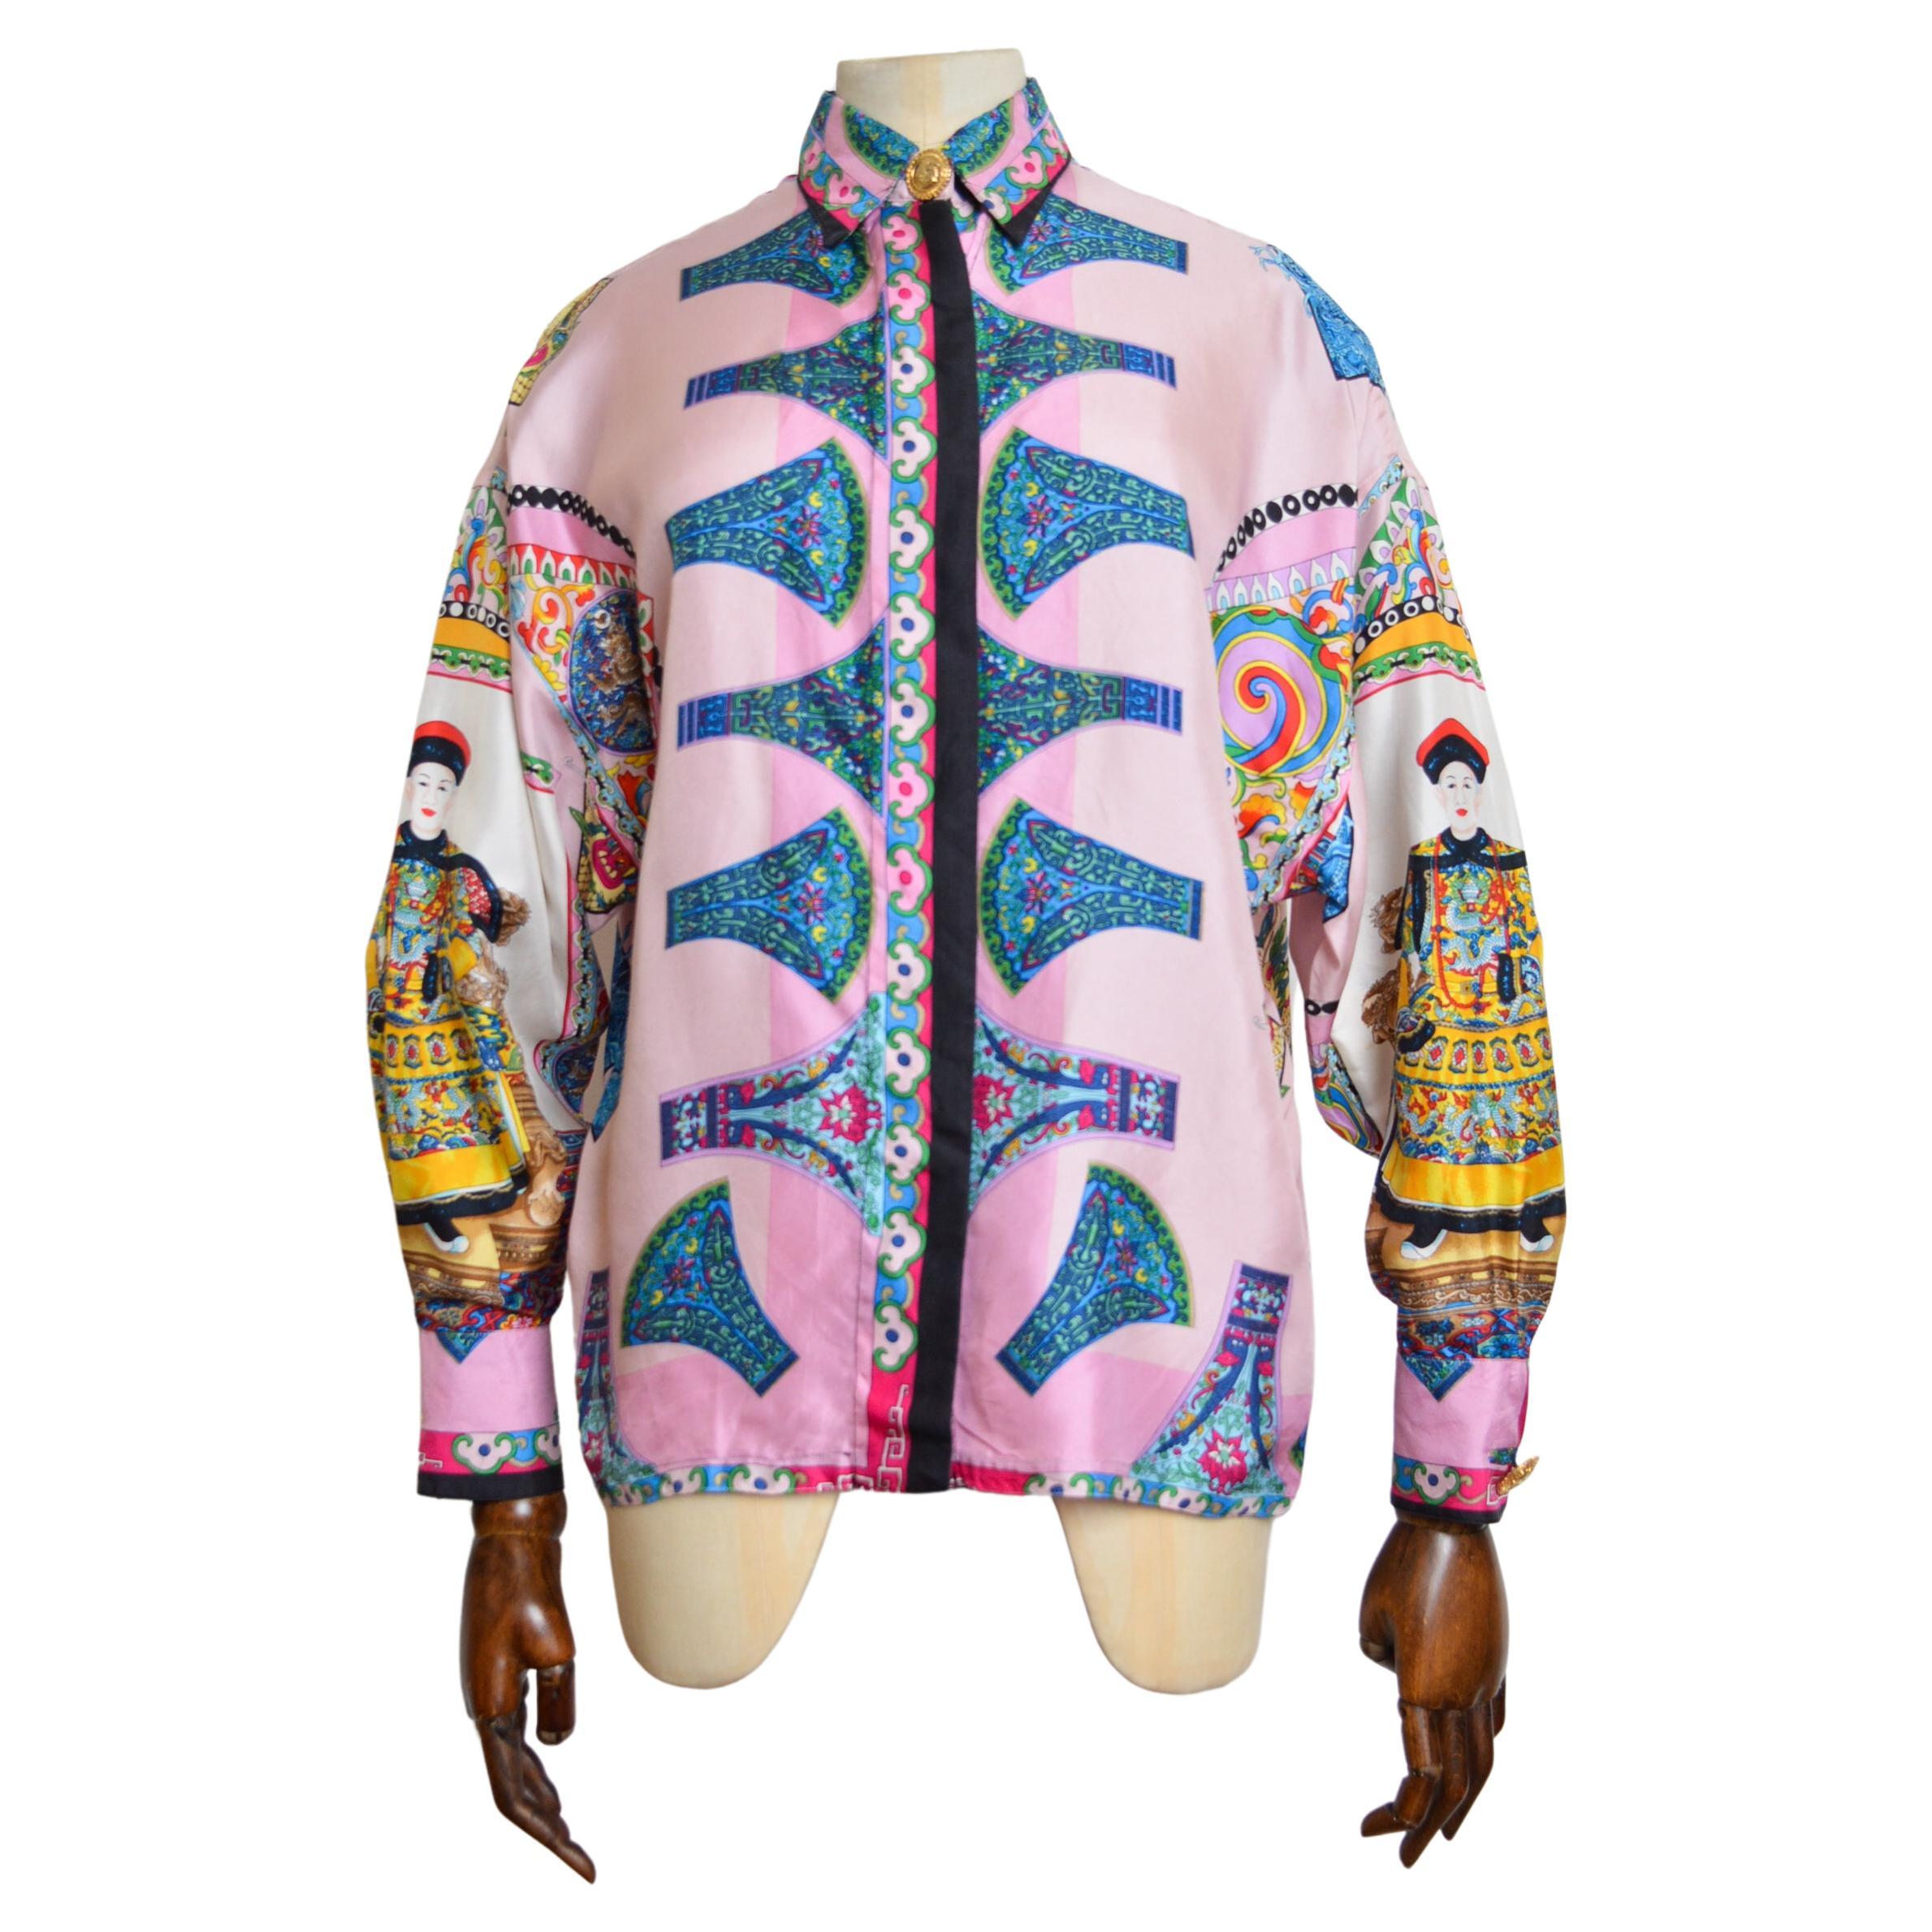 Gianni Versace 1993 Spring Runway Atelier Pure Silk patterned Colourful Shirt